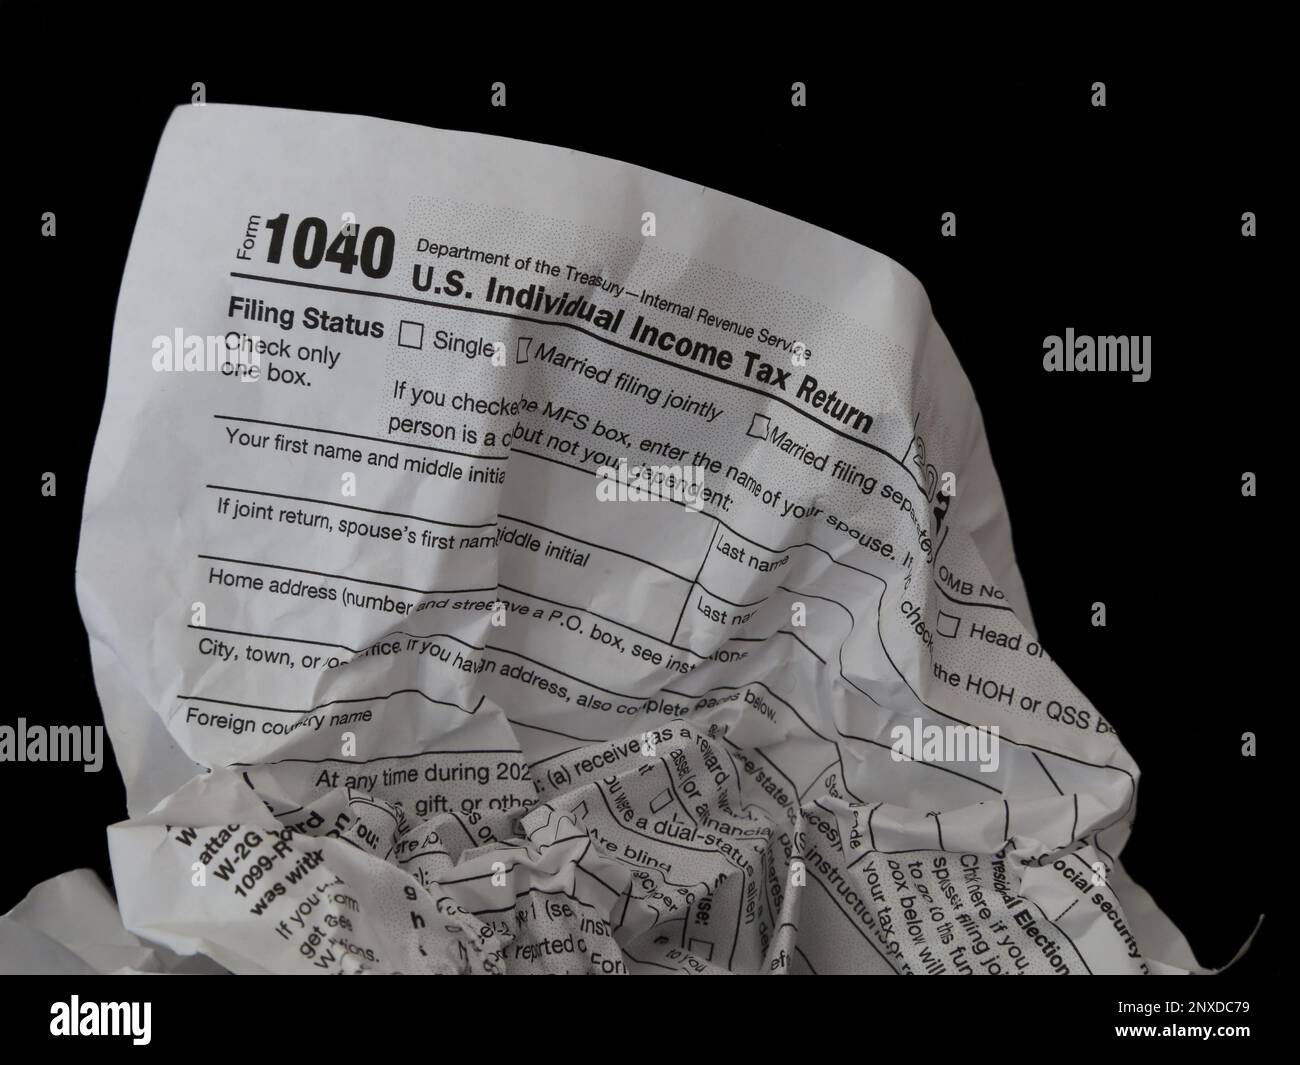 A wrinkled IRS 1040 tax form in the USA is shown in a closeup view, symbolizing the concept of frustration with the tax preparation process. Stock Photo